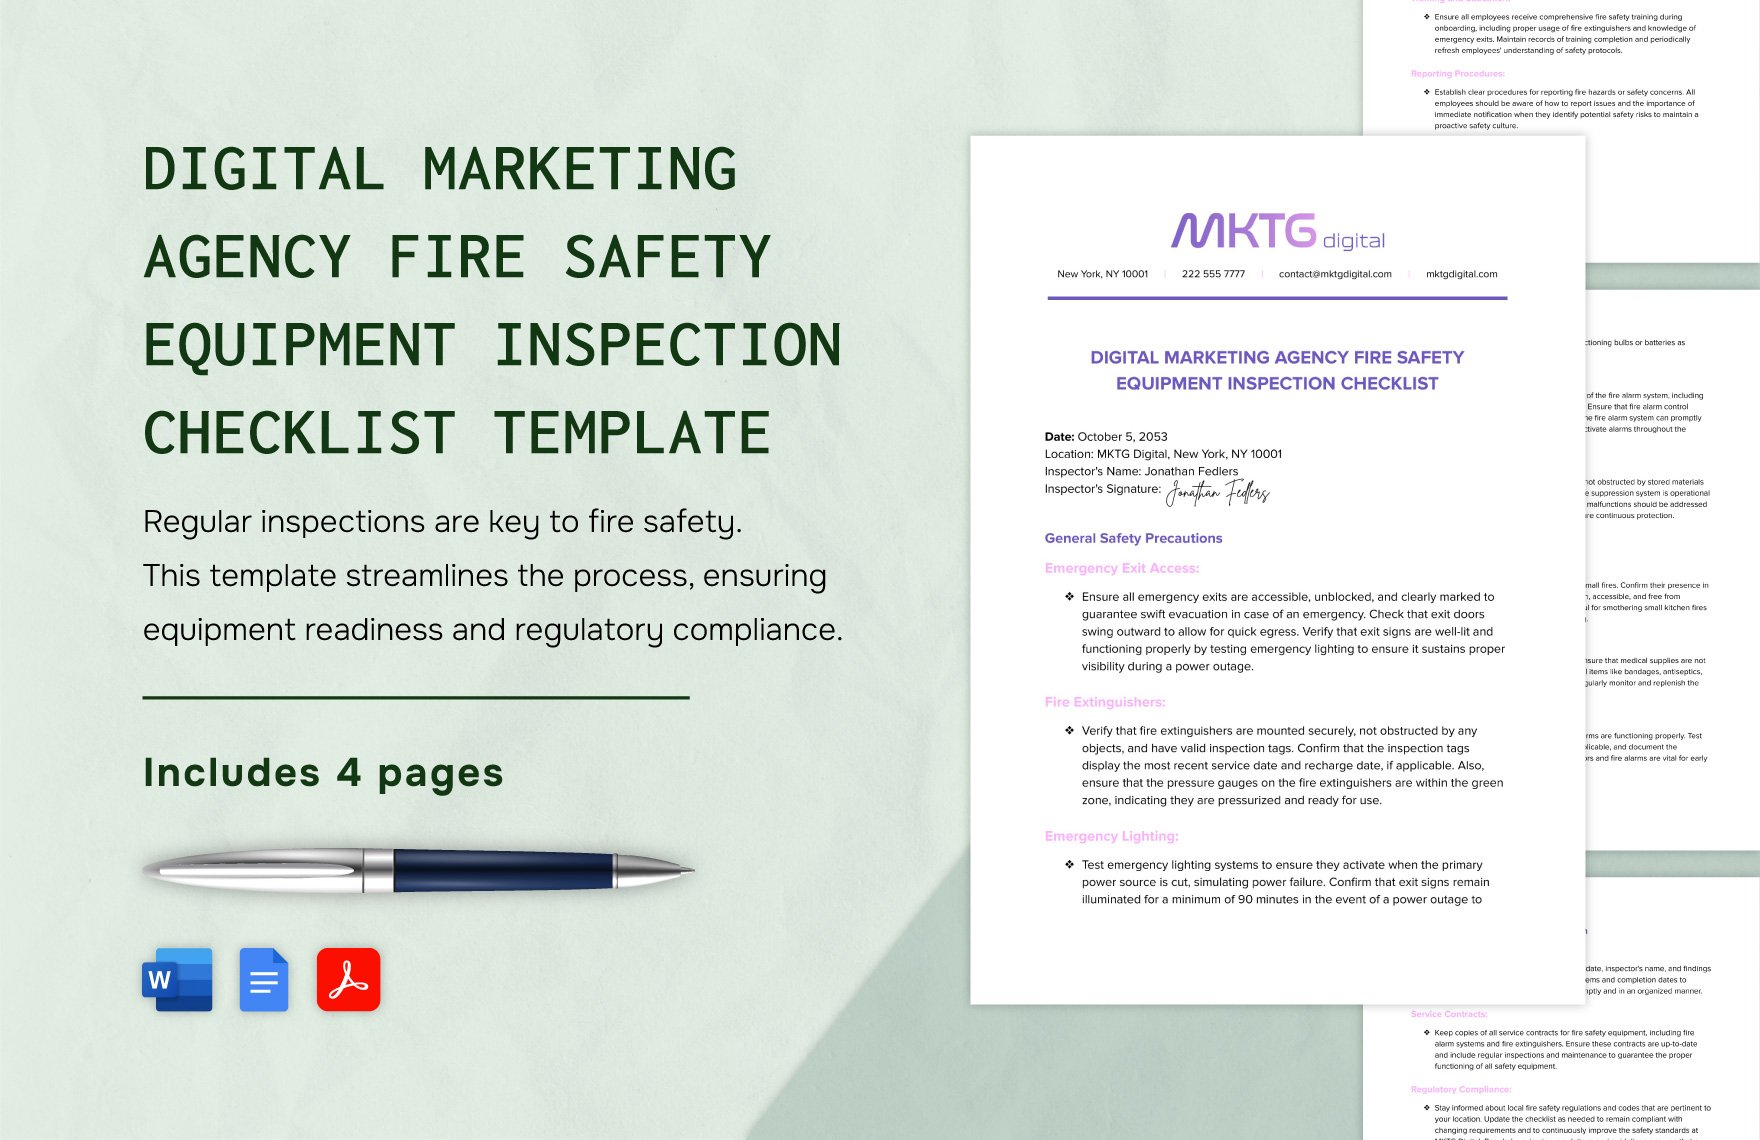 Digital Marketing Agency Fire Safety Equipment Inspection Checklist Template